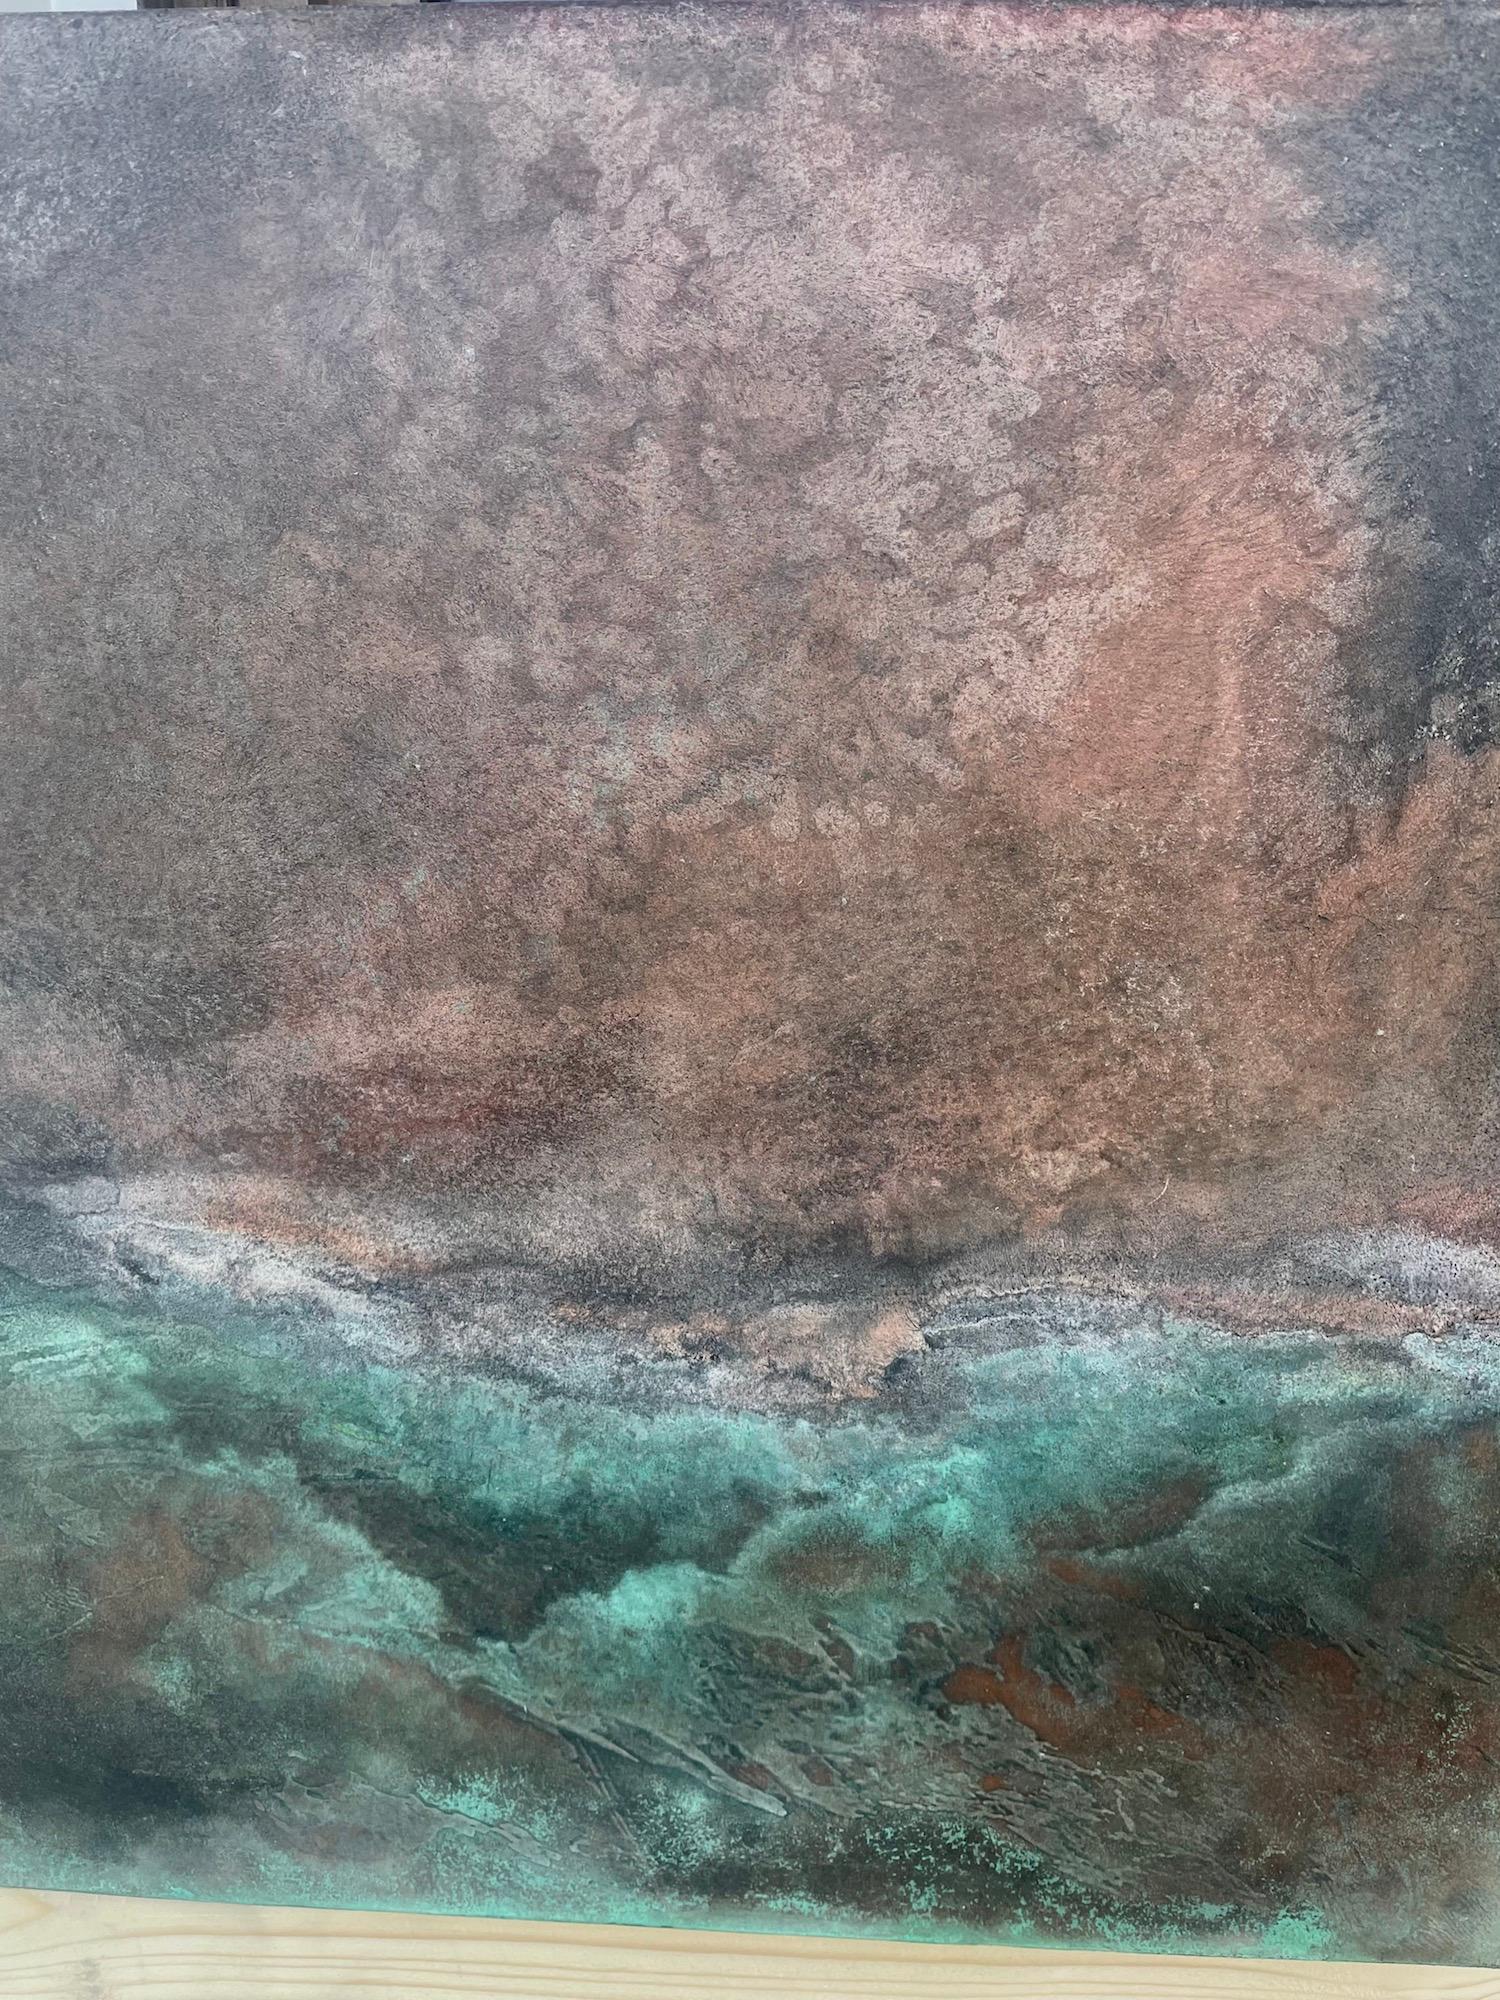 The Earth is round II by Frédérique Domergue - Abstract painting on metal, sea For Sale 3